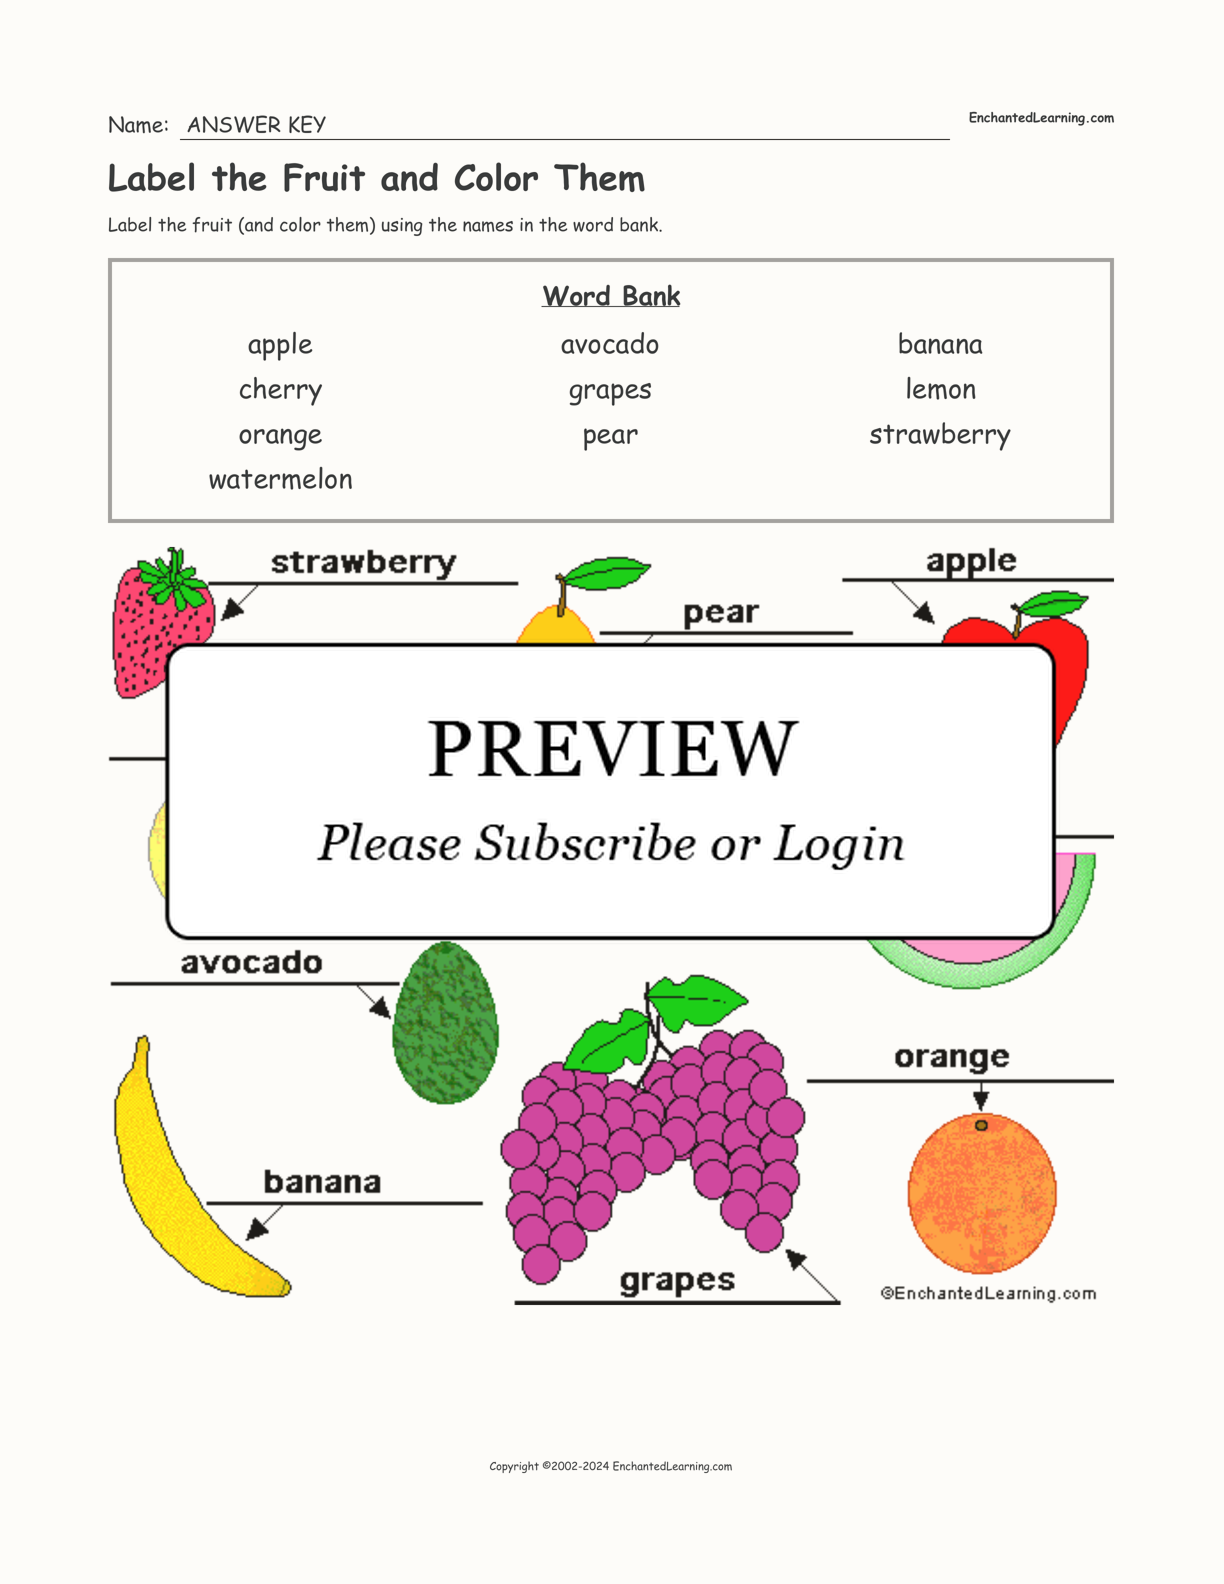 Label the Fruit and Color Them interactive worksheet page 2